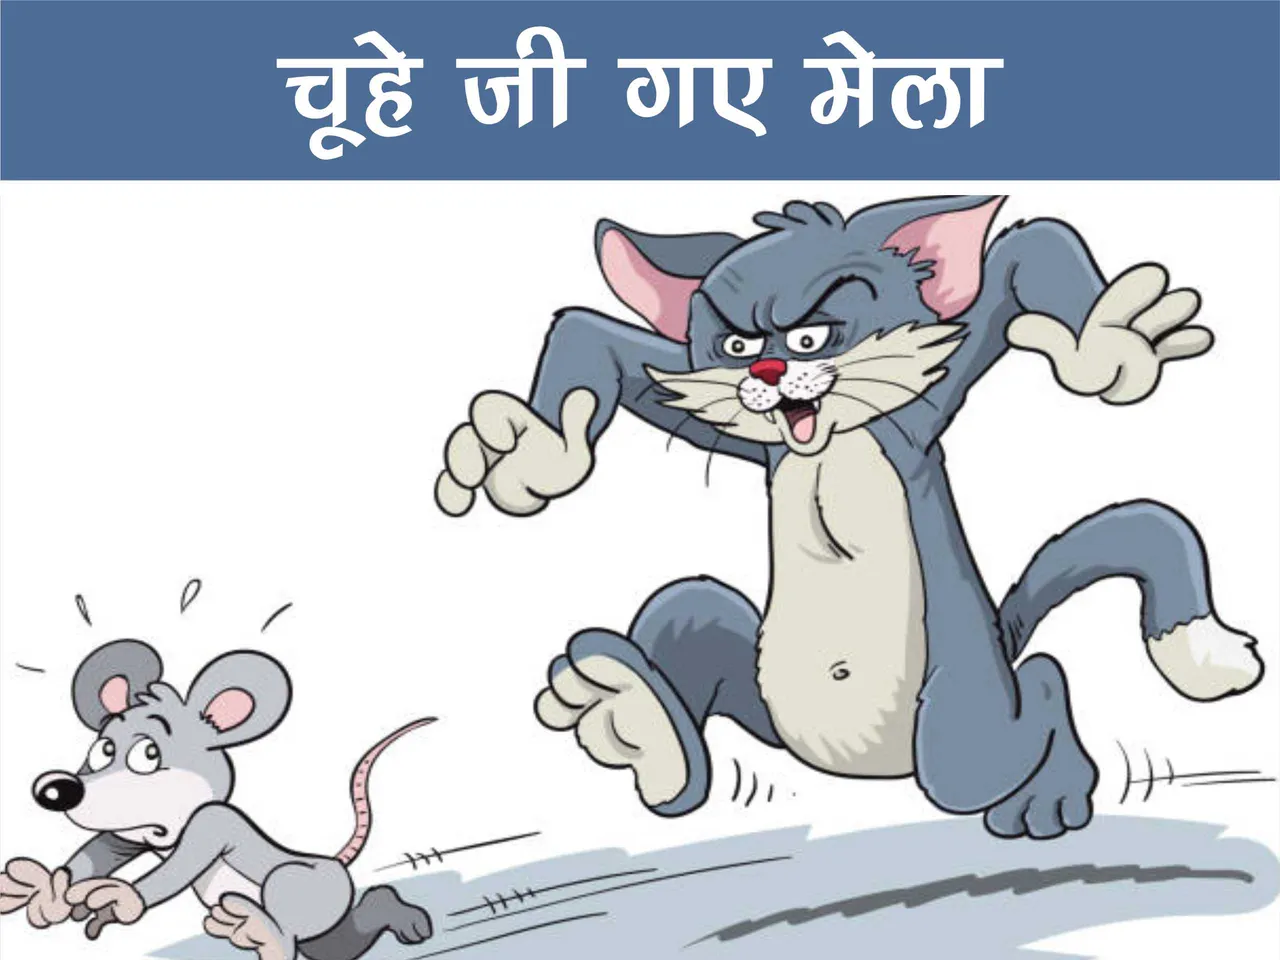 Cat chasing a mouse cartoon image